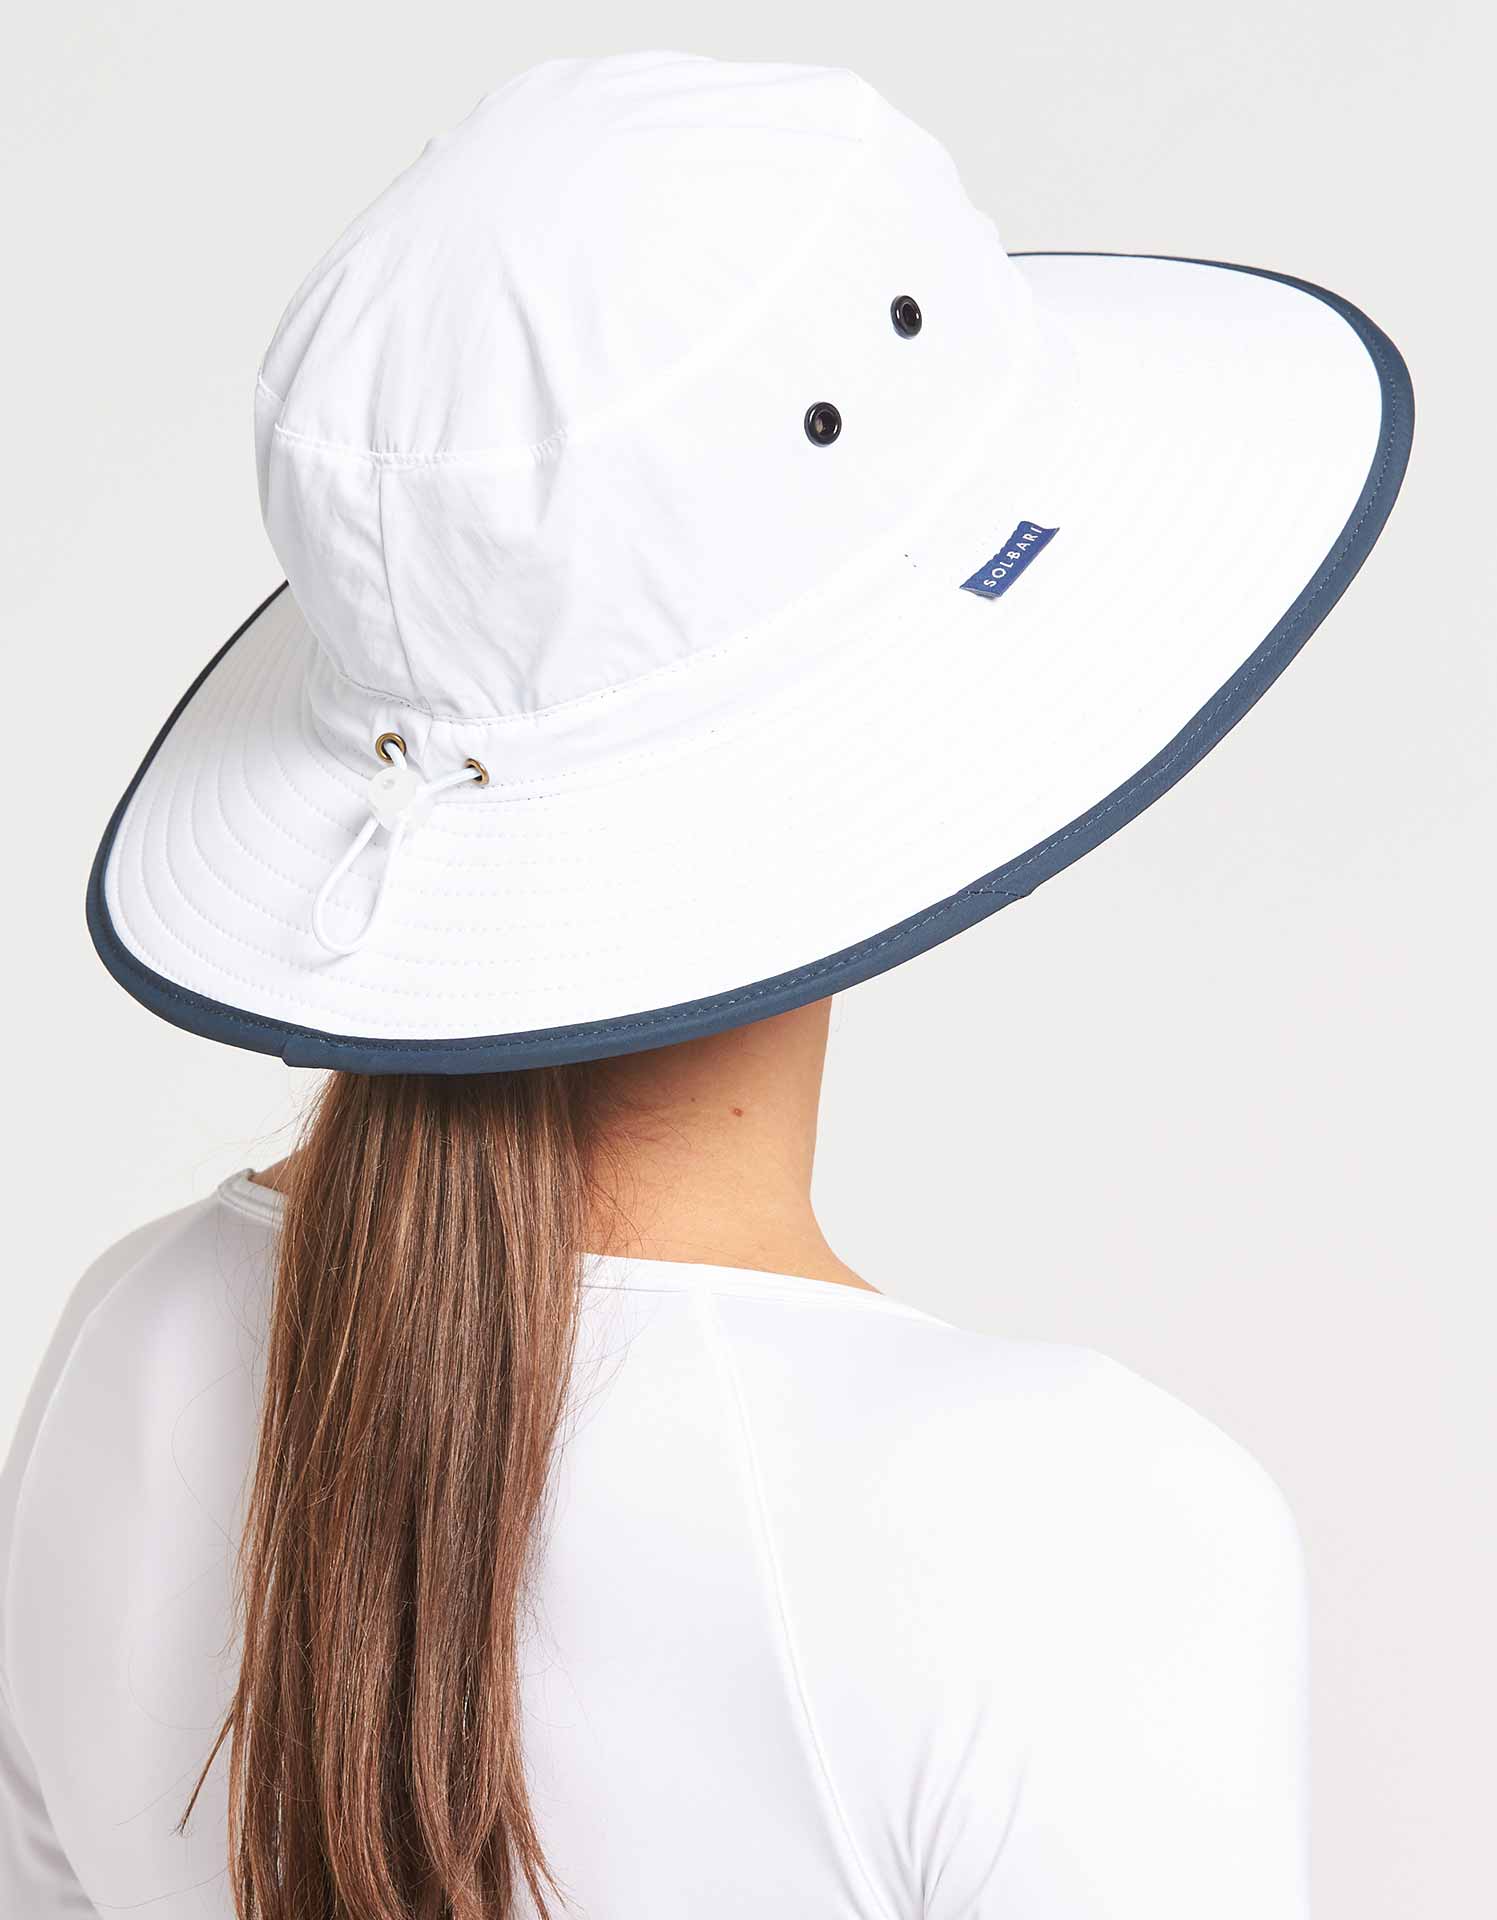 How to pick the perfect sun hat for sun protection – Solbari